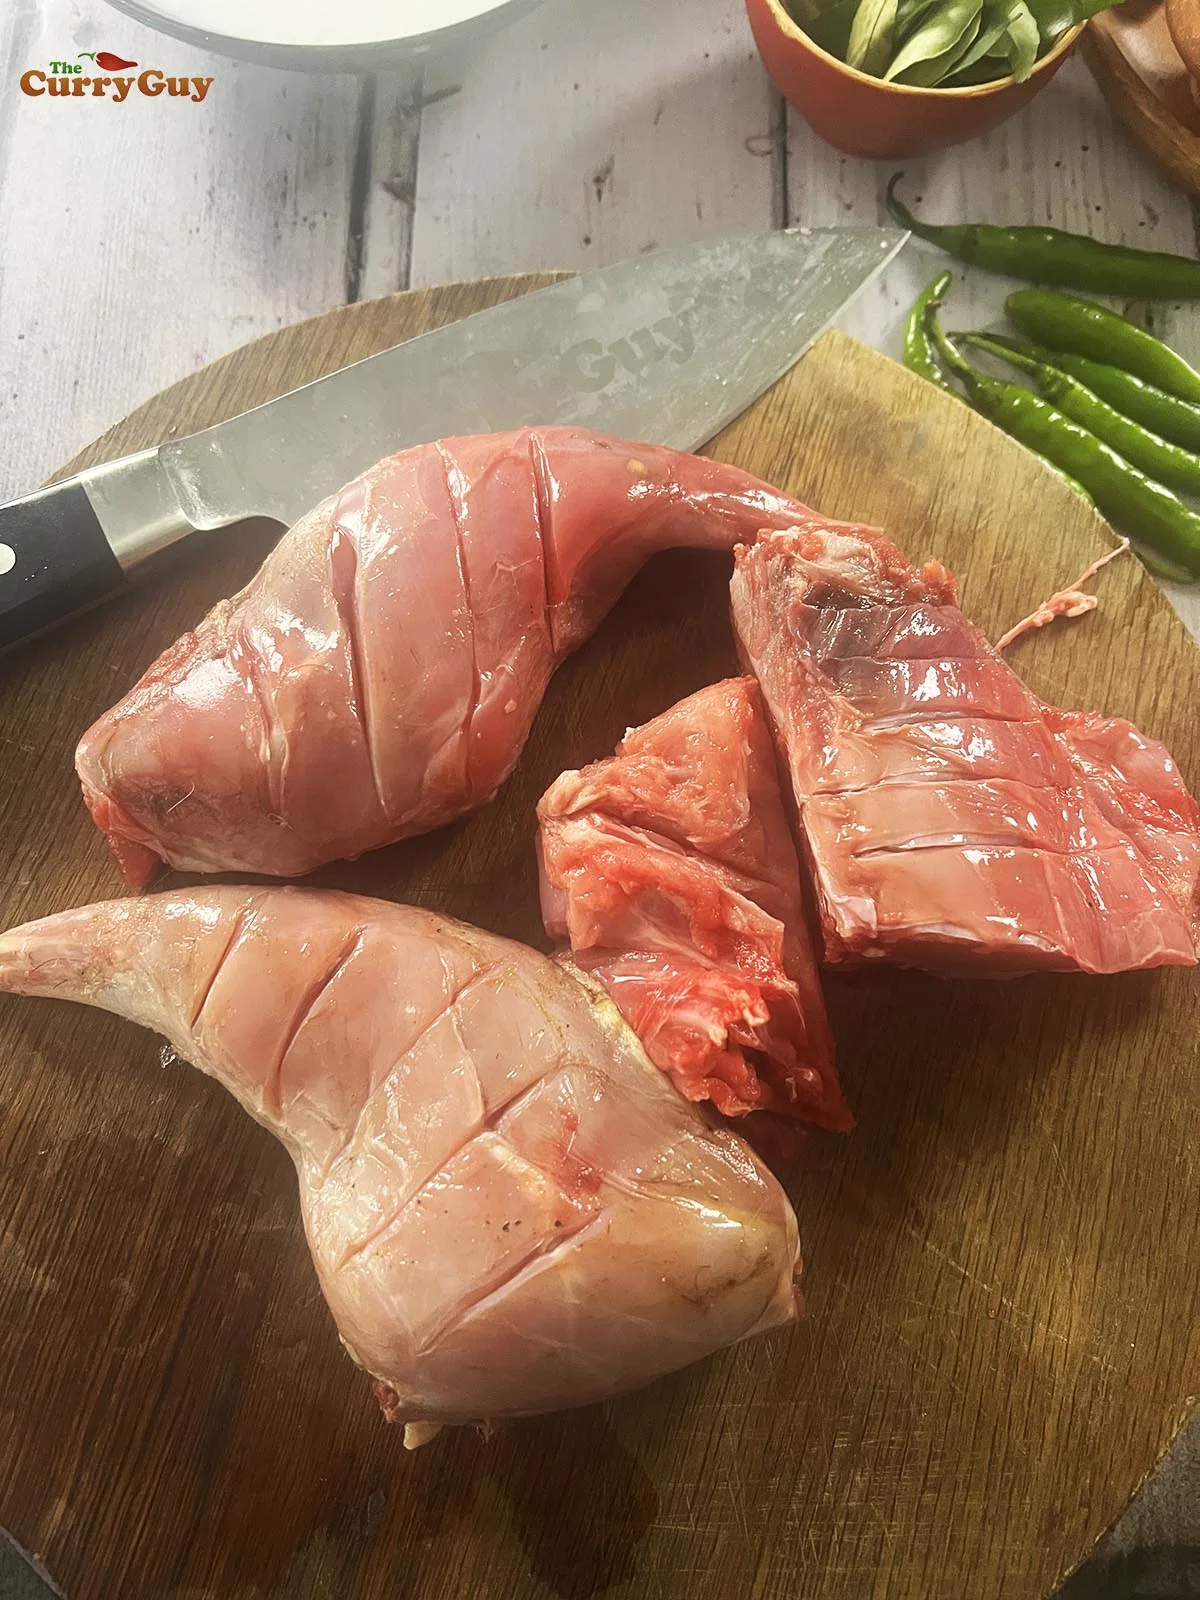 Scoring the rabbit pieces for better penetration of the marinade.